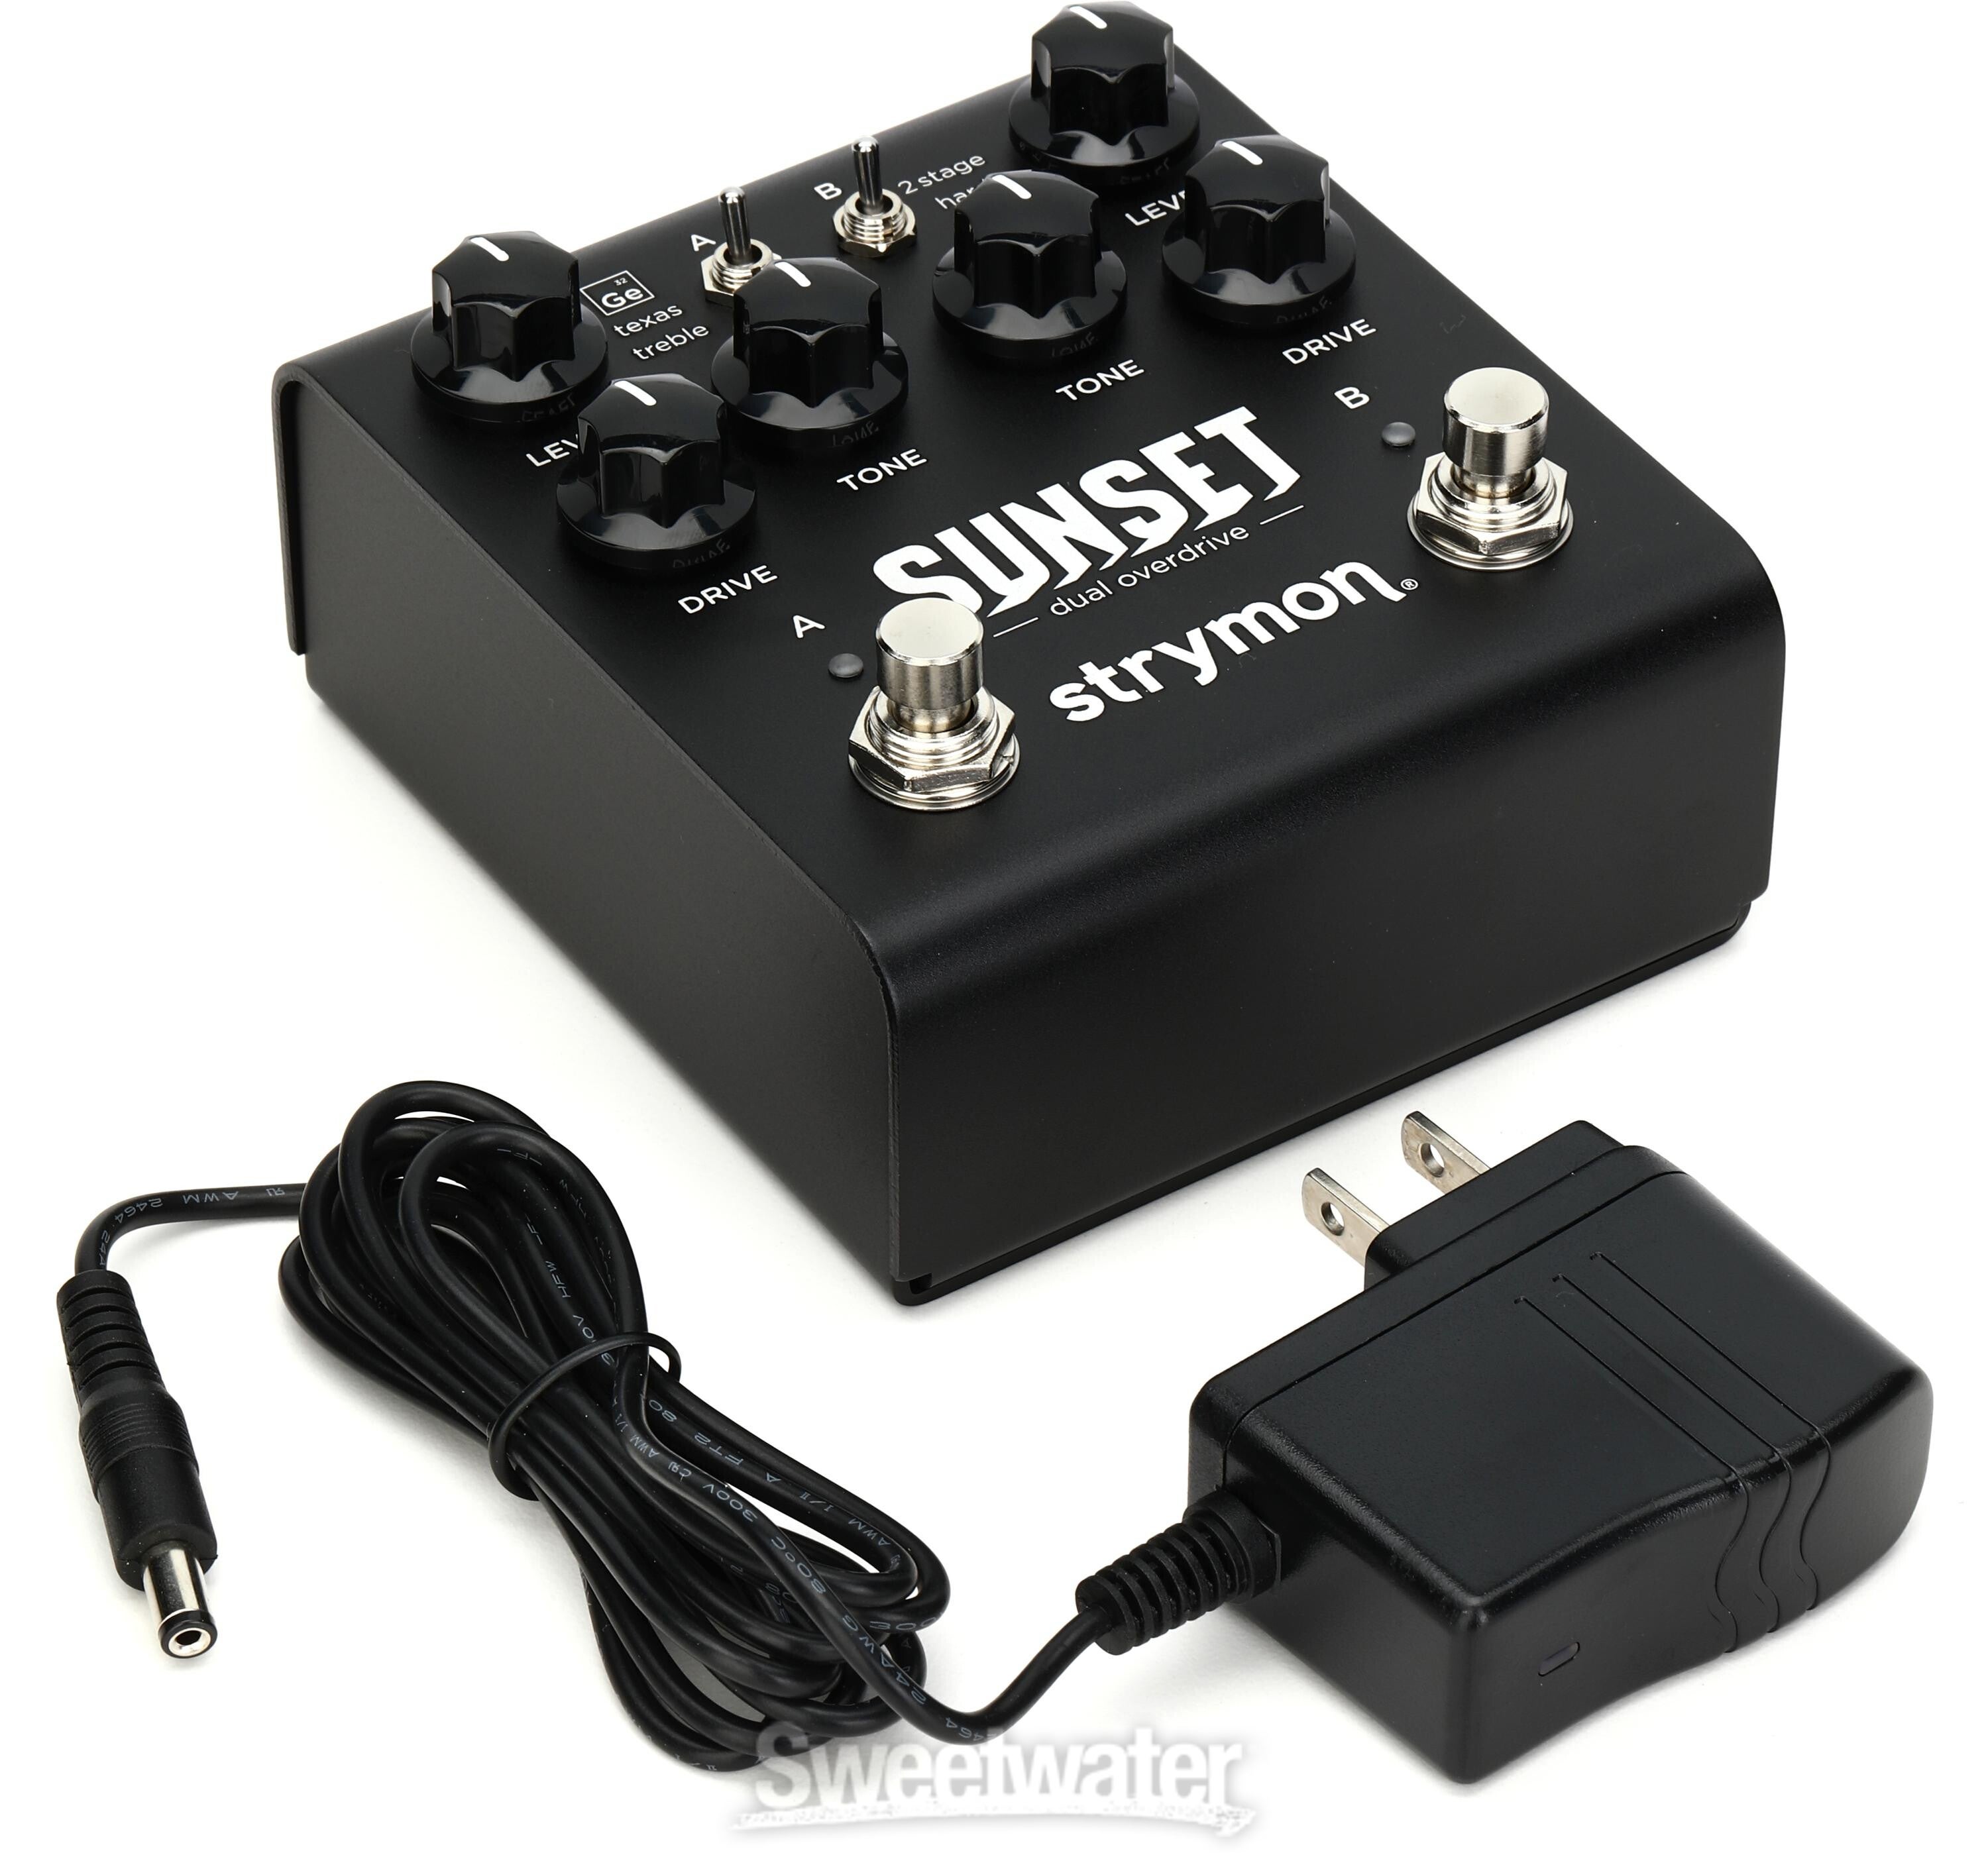 Strymon Sunset Dual Overdrive Pedal - Midnight Edition Reviews 